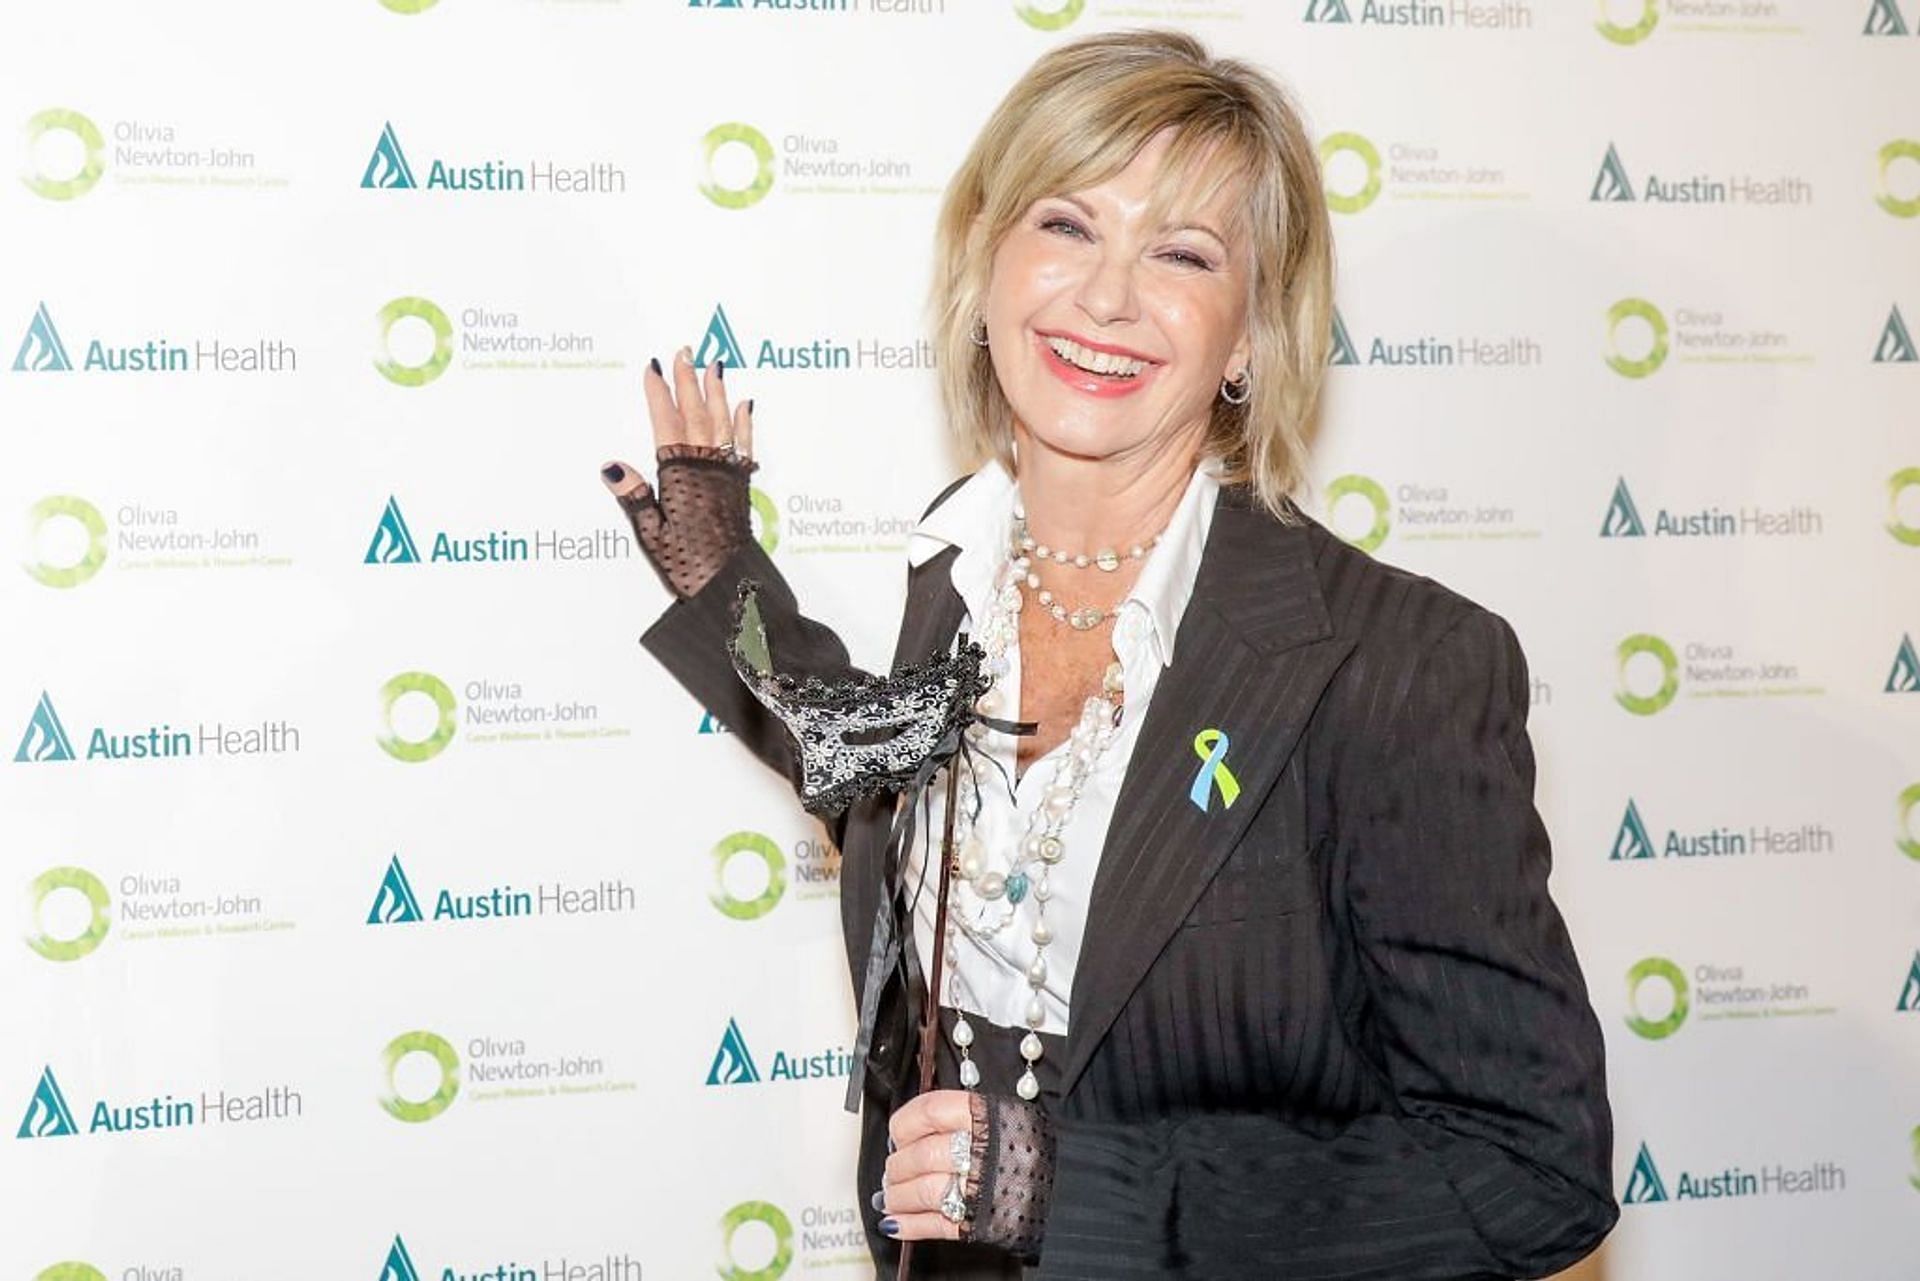 Olivia Newton-John was a famous singer, actress and activist (Image via Sam Tabone/Getty Images)